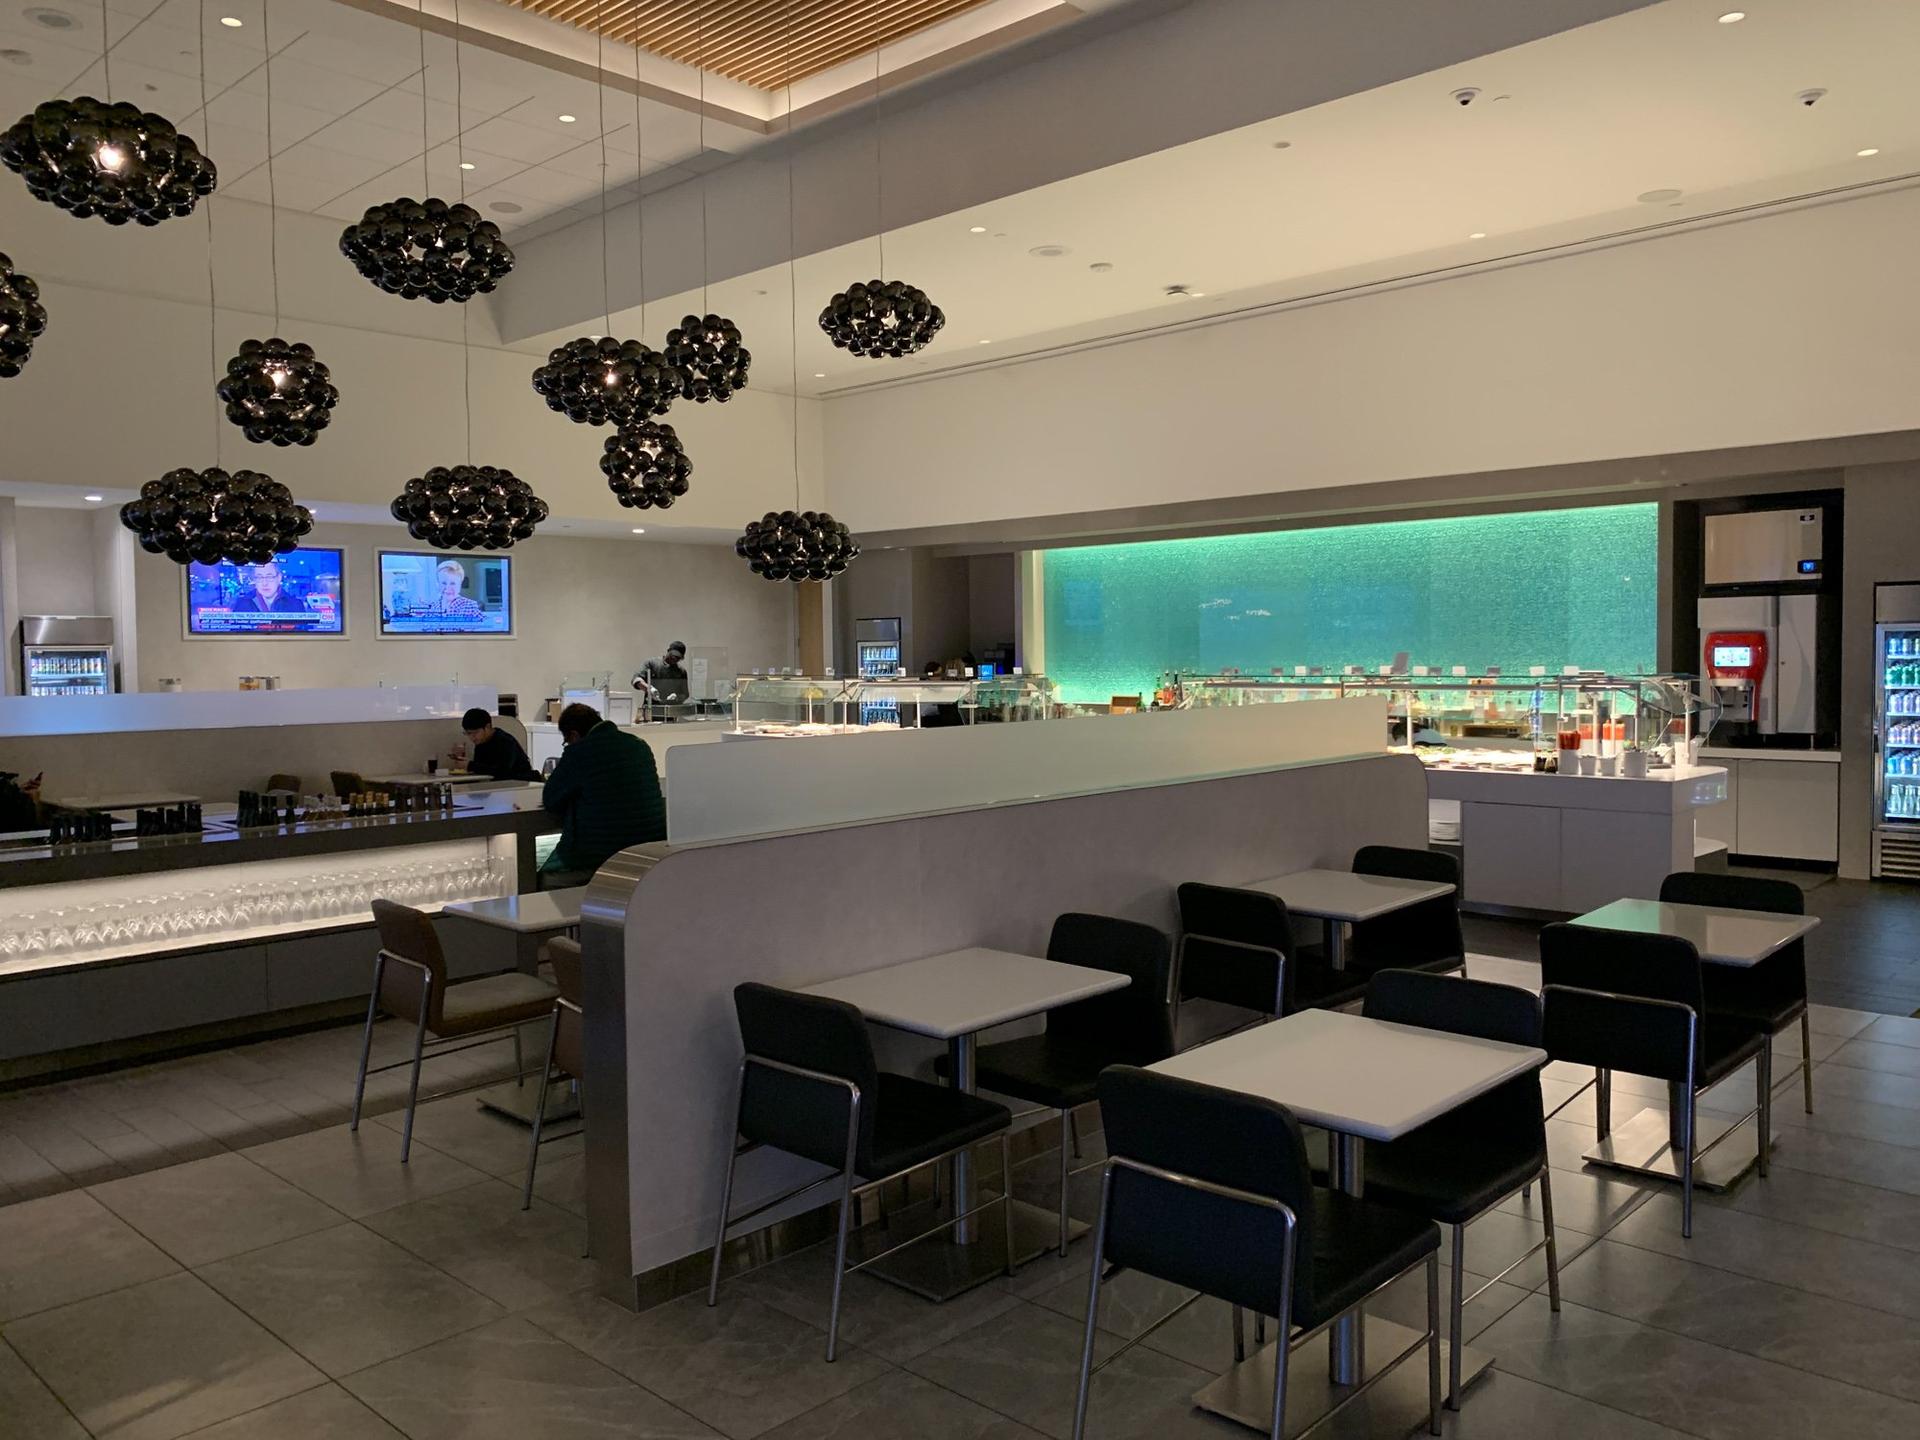 American Airlines Flagship Lounge image 24 of 55